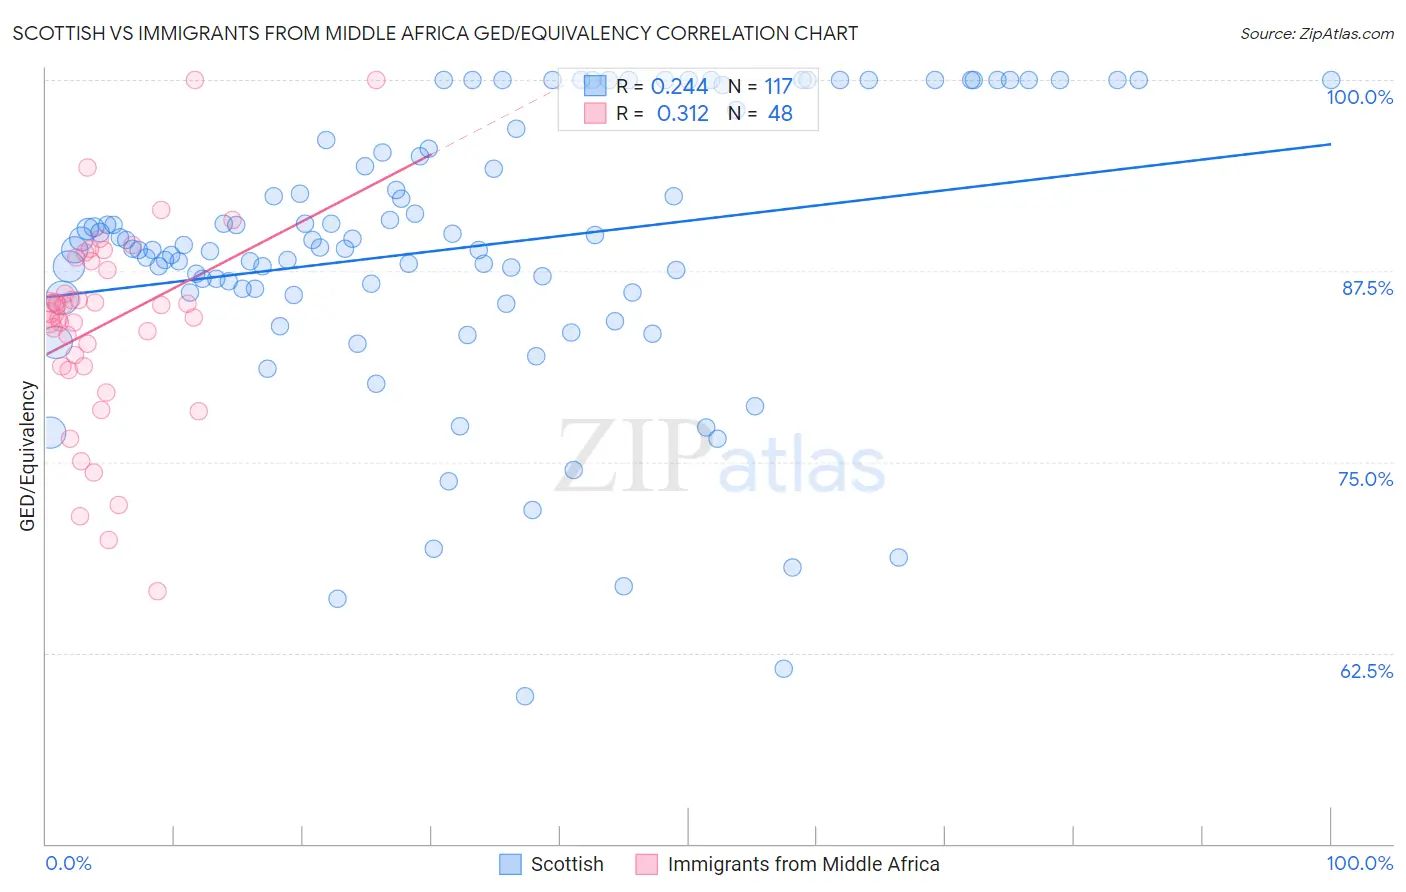 Scottish vs Immigrants from Middle Africa GED/Equivalency